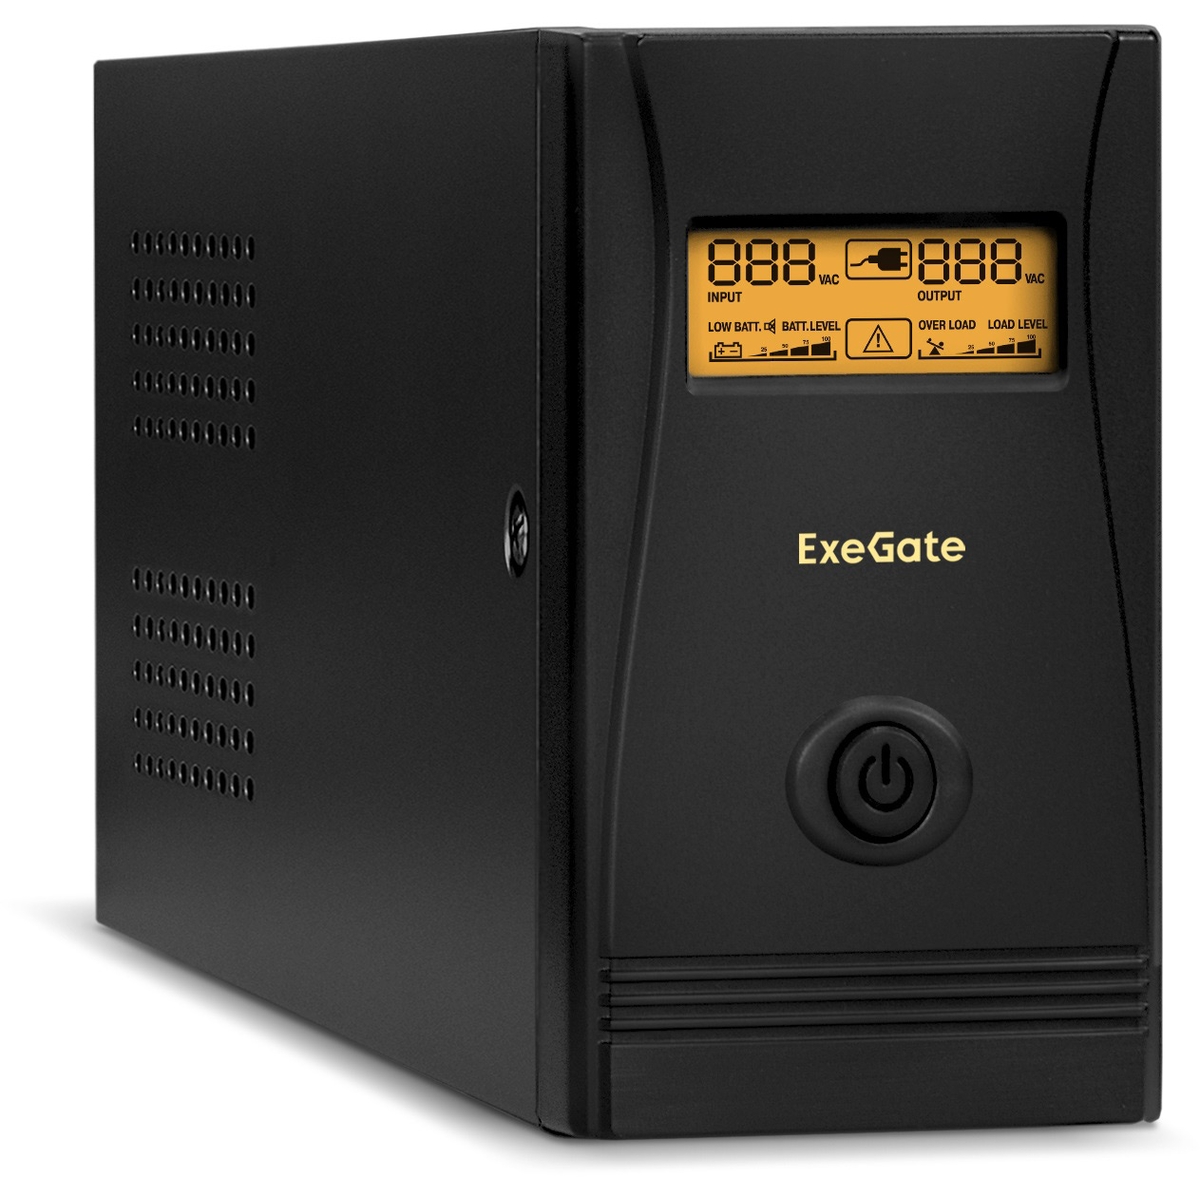 UPS ExeGate SpecialPro Smart LLB-600.LCD.AVR.EURO